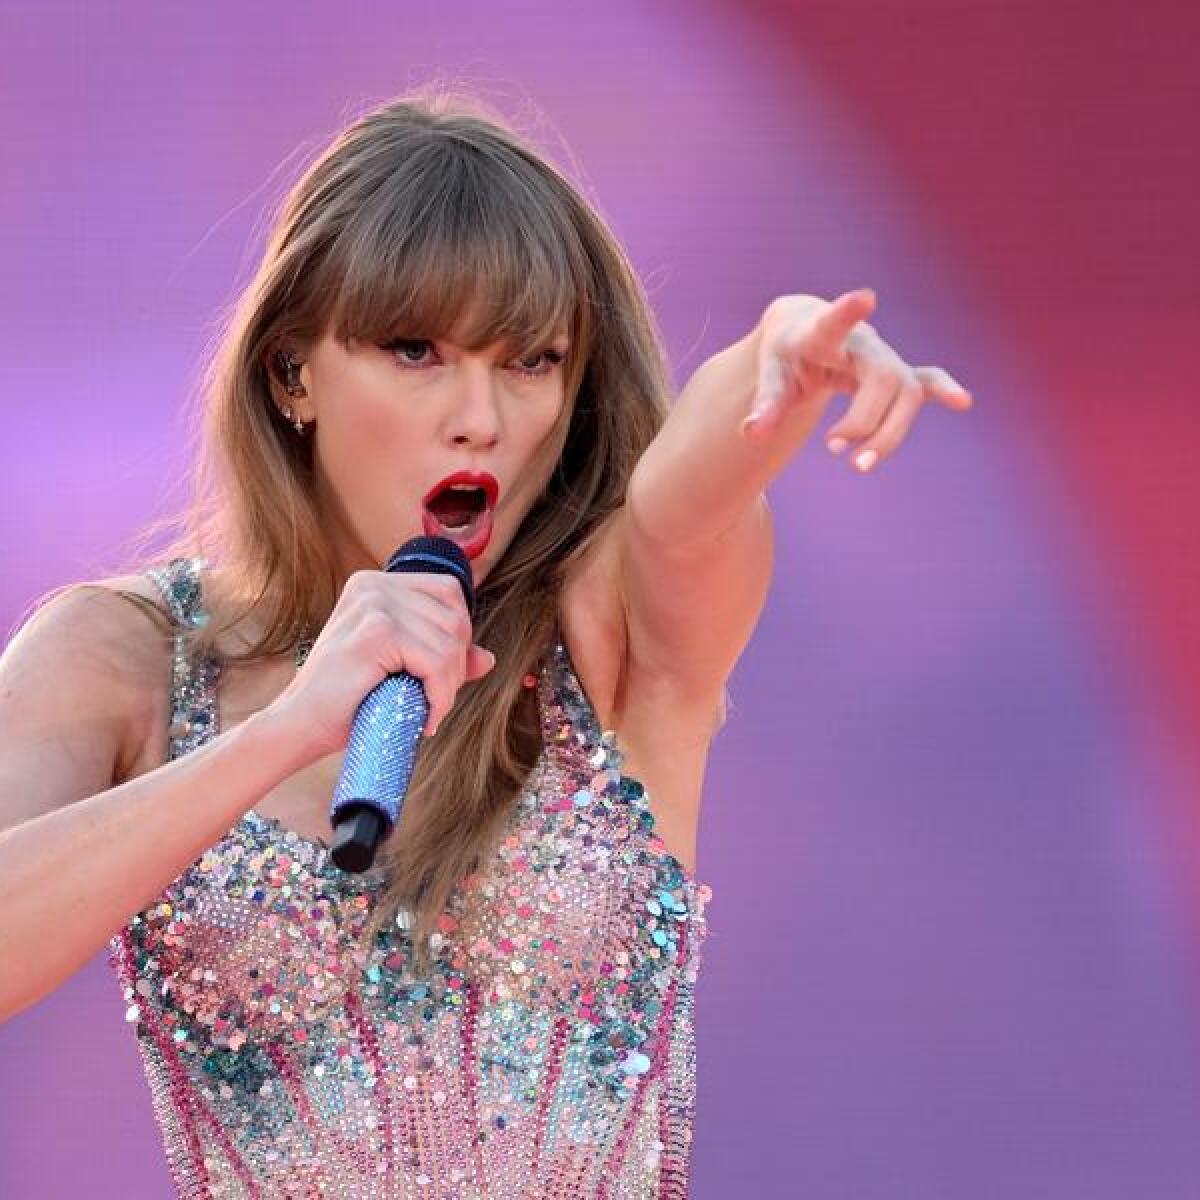 Taylor Swift performs at the MCG in Melbourne